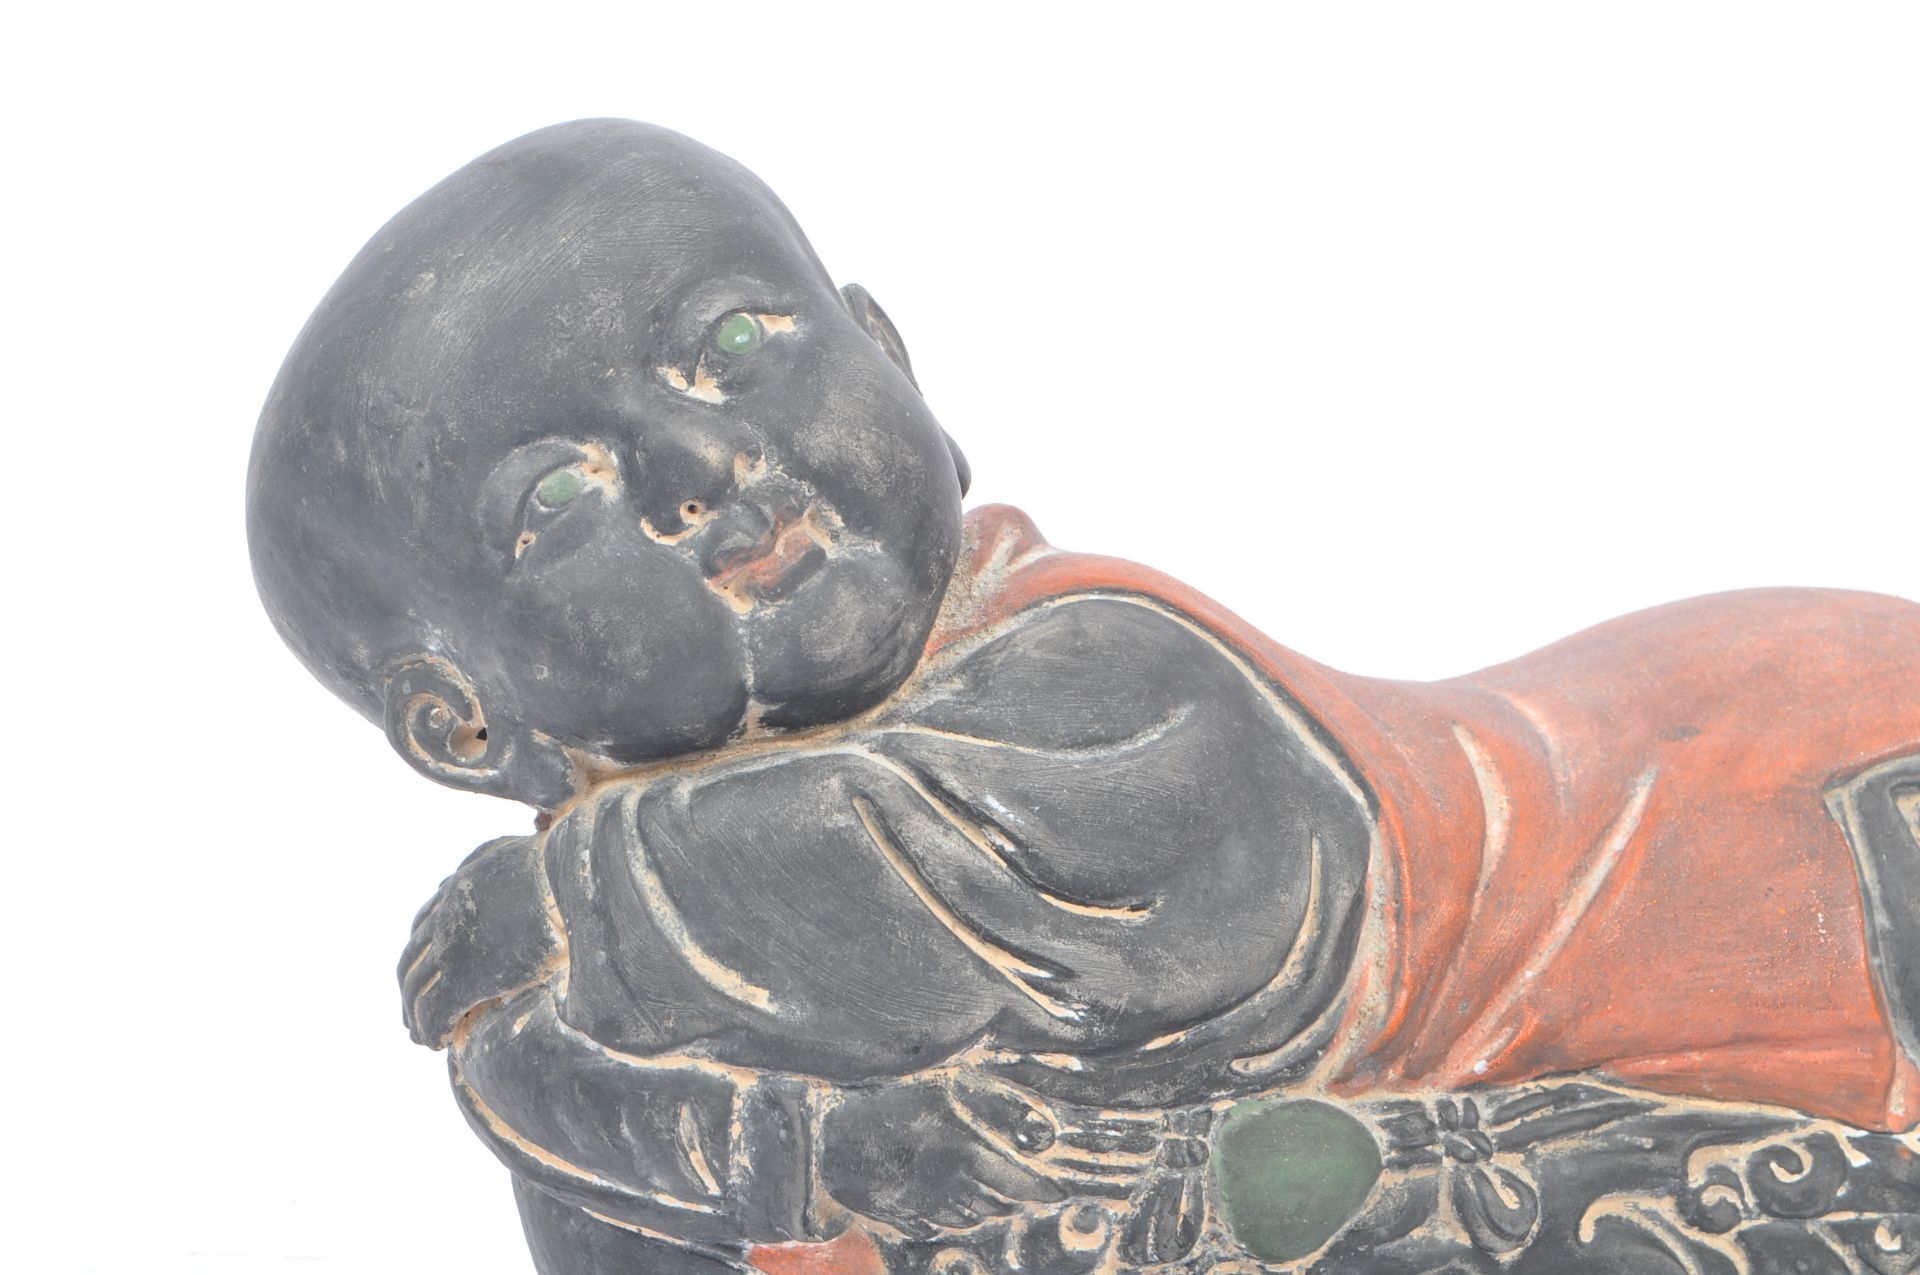 EARLY 20TH CENTURY CHINESE CERAMIC PILLOW FIGURE - Image 5 of 6